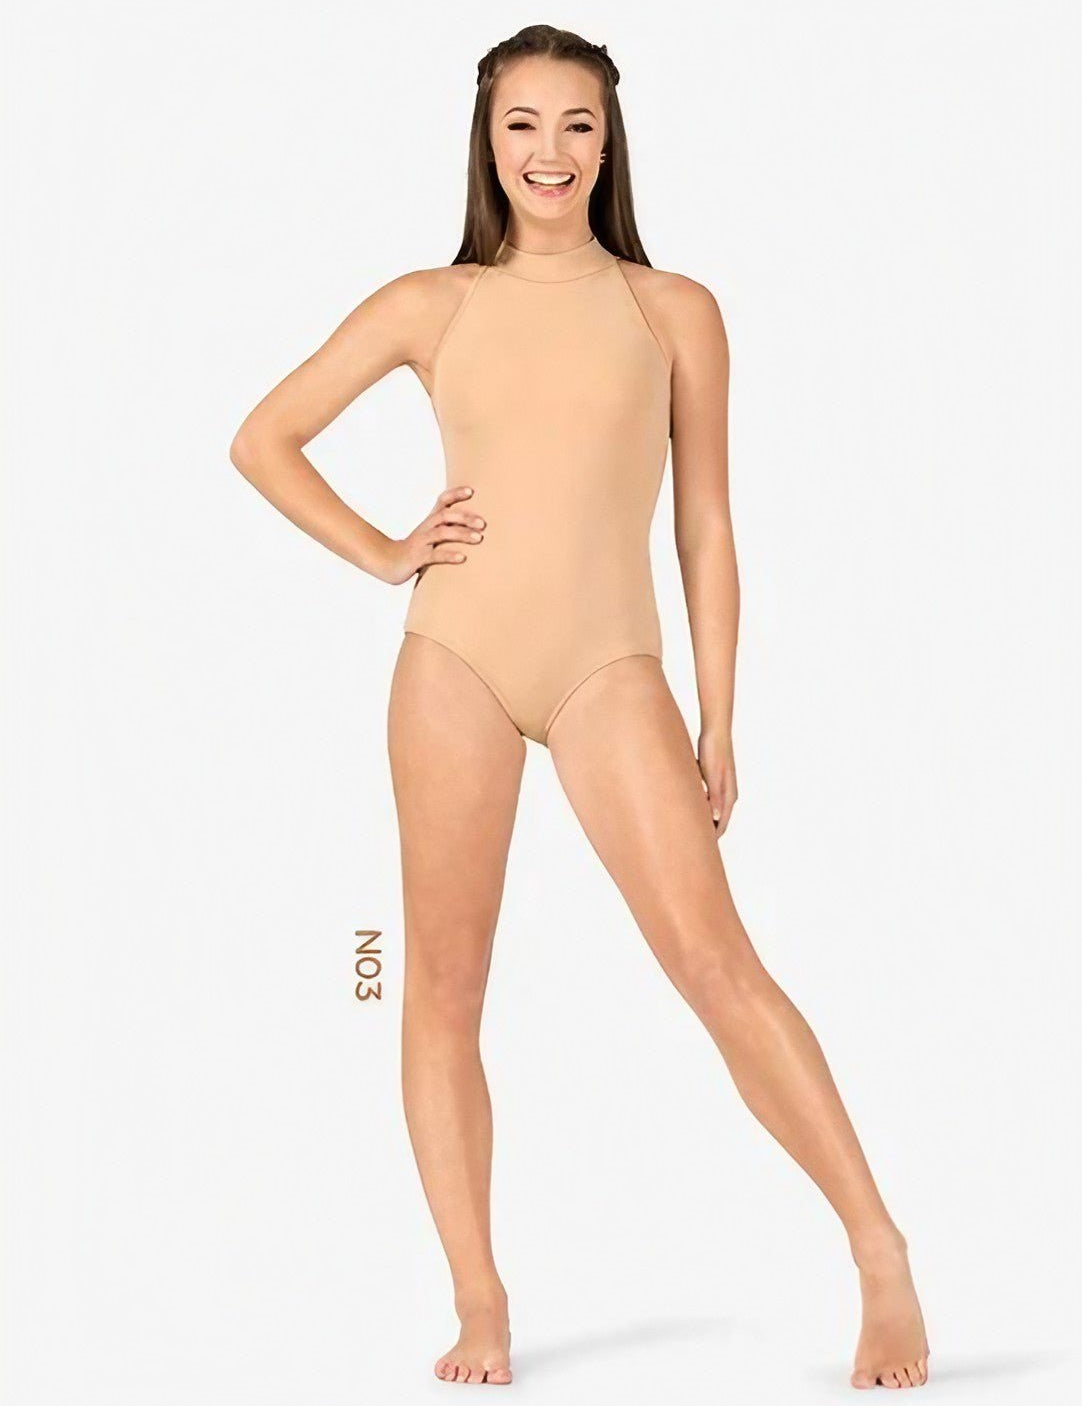 A young girl elegantly dressed in a tan high neck tank leotard